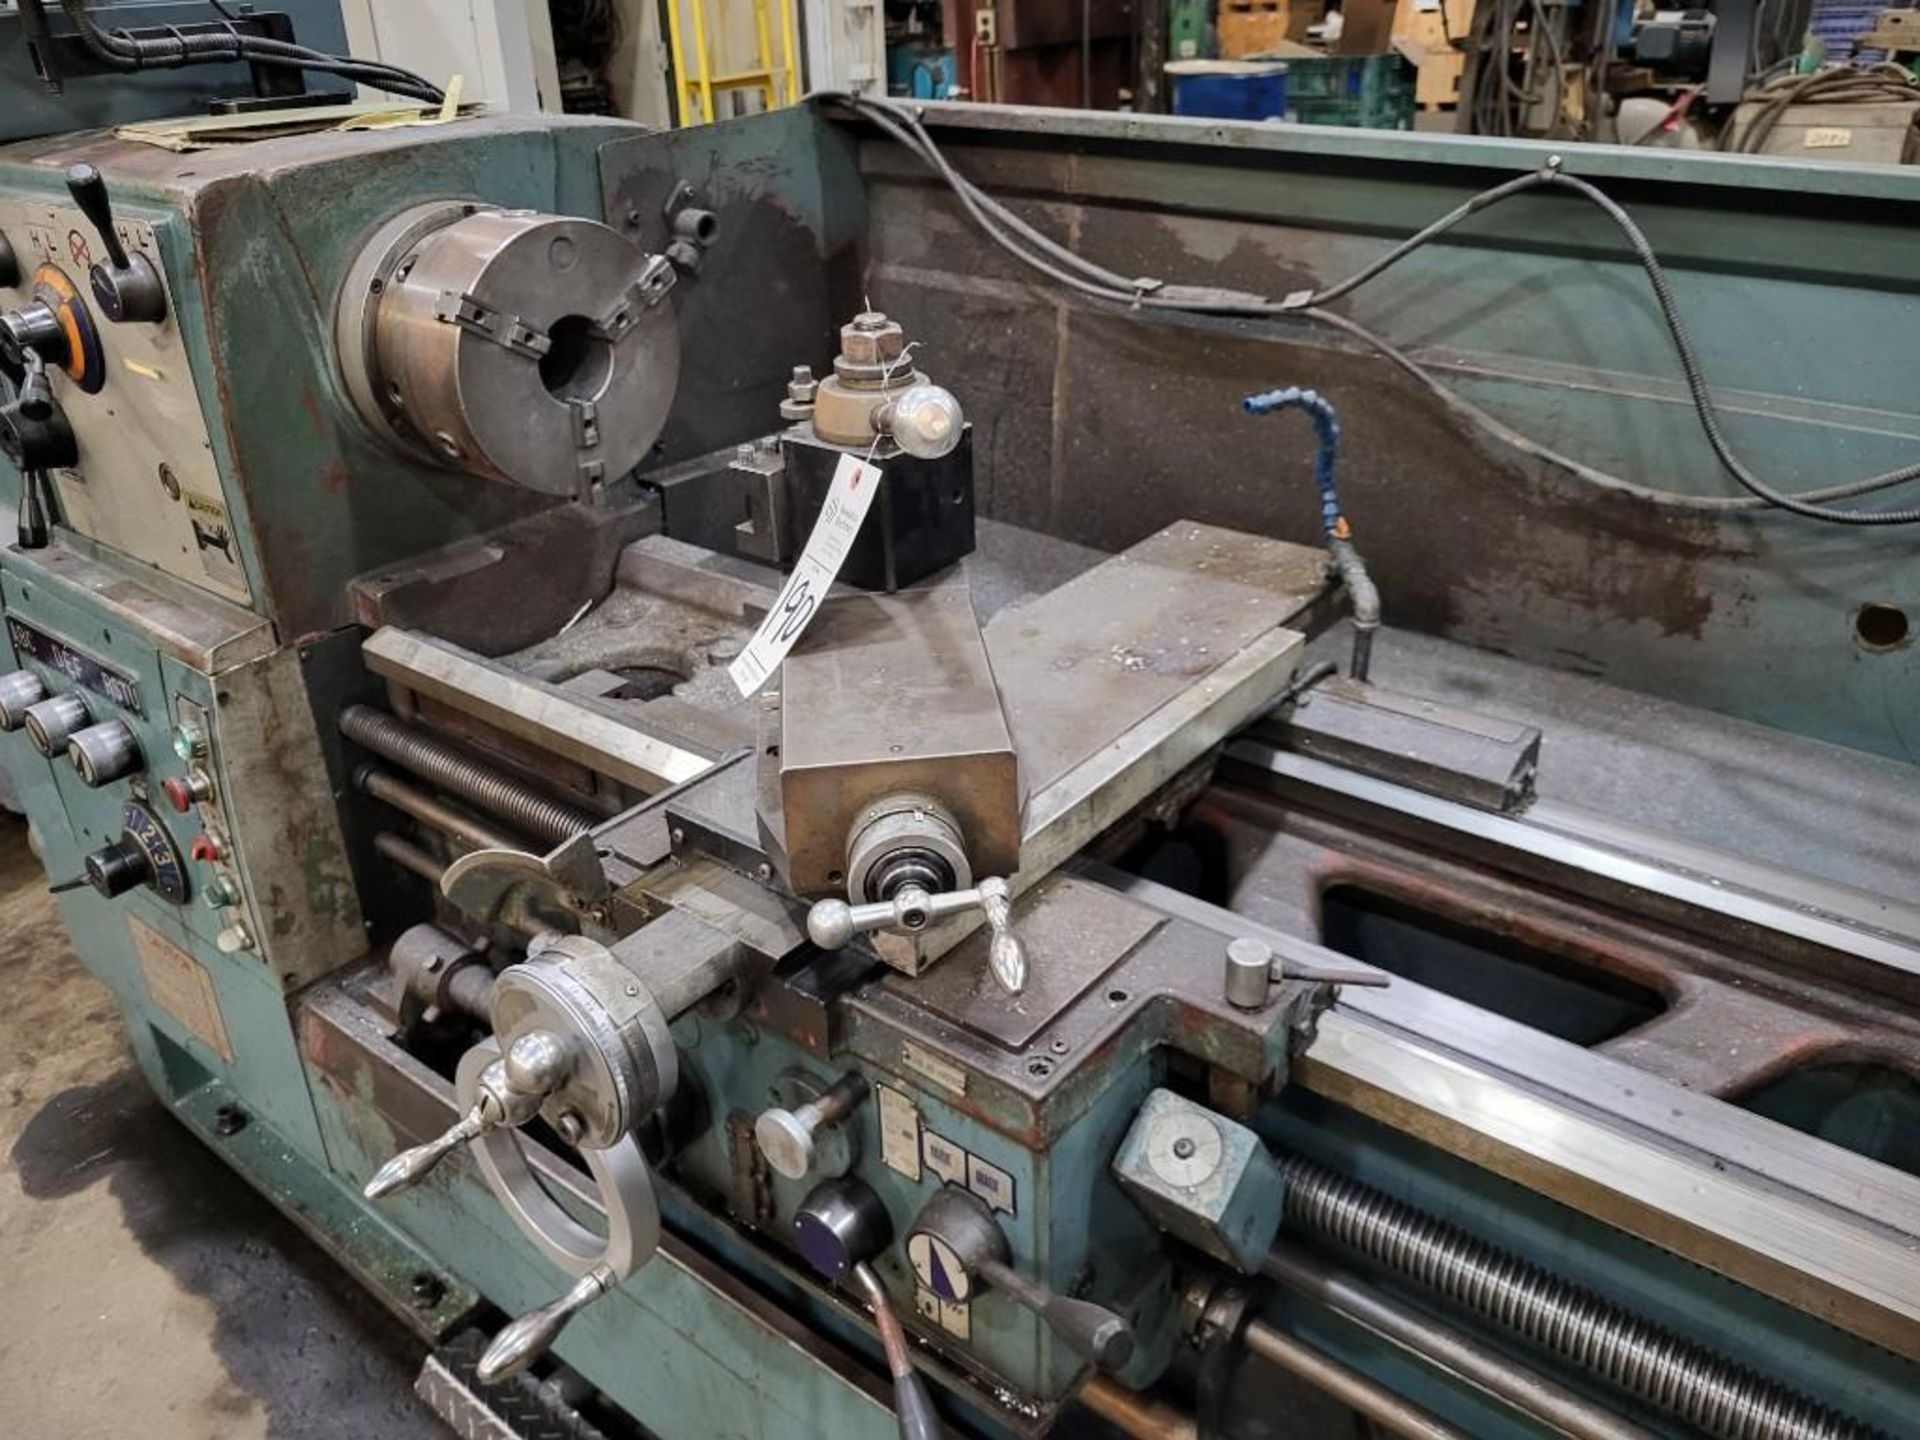 VICTOR 2080S 20" X 80" GAP BED PRECISION LATHE, WITH TAILSTOCK, CHUCK, STEADY REST, TOOLING - Image 13 of 28